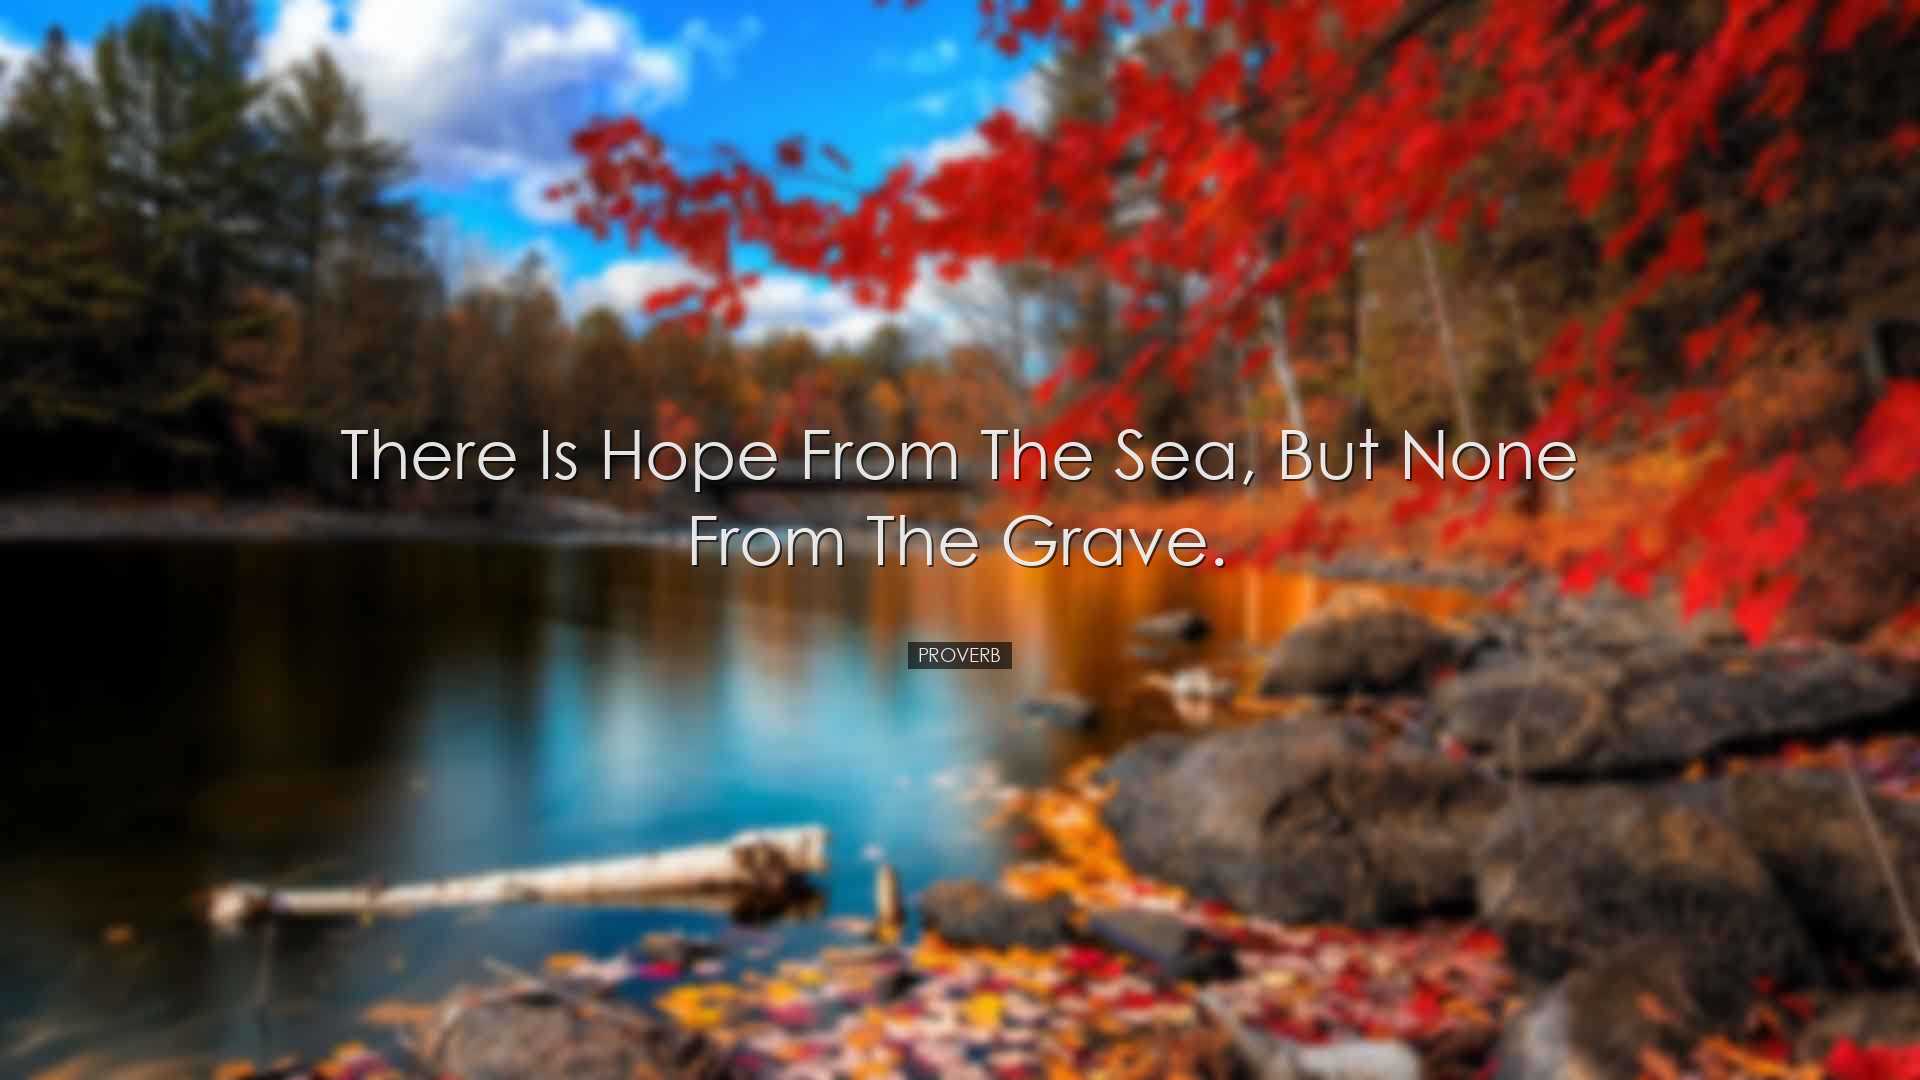 There is hope from the sea, but none from the grave. - Proverb